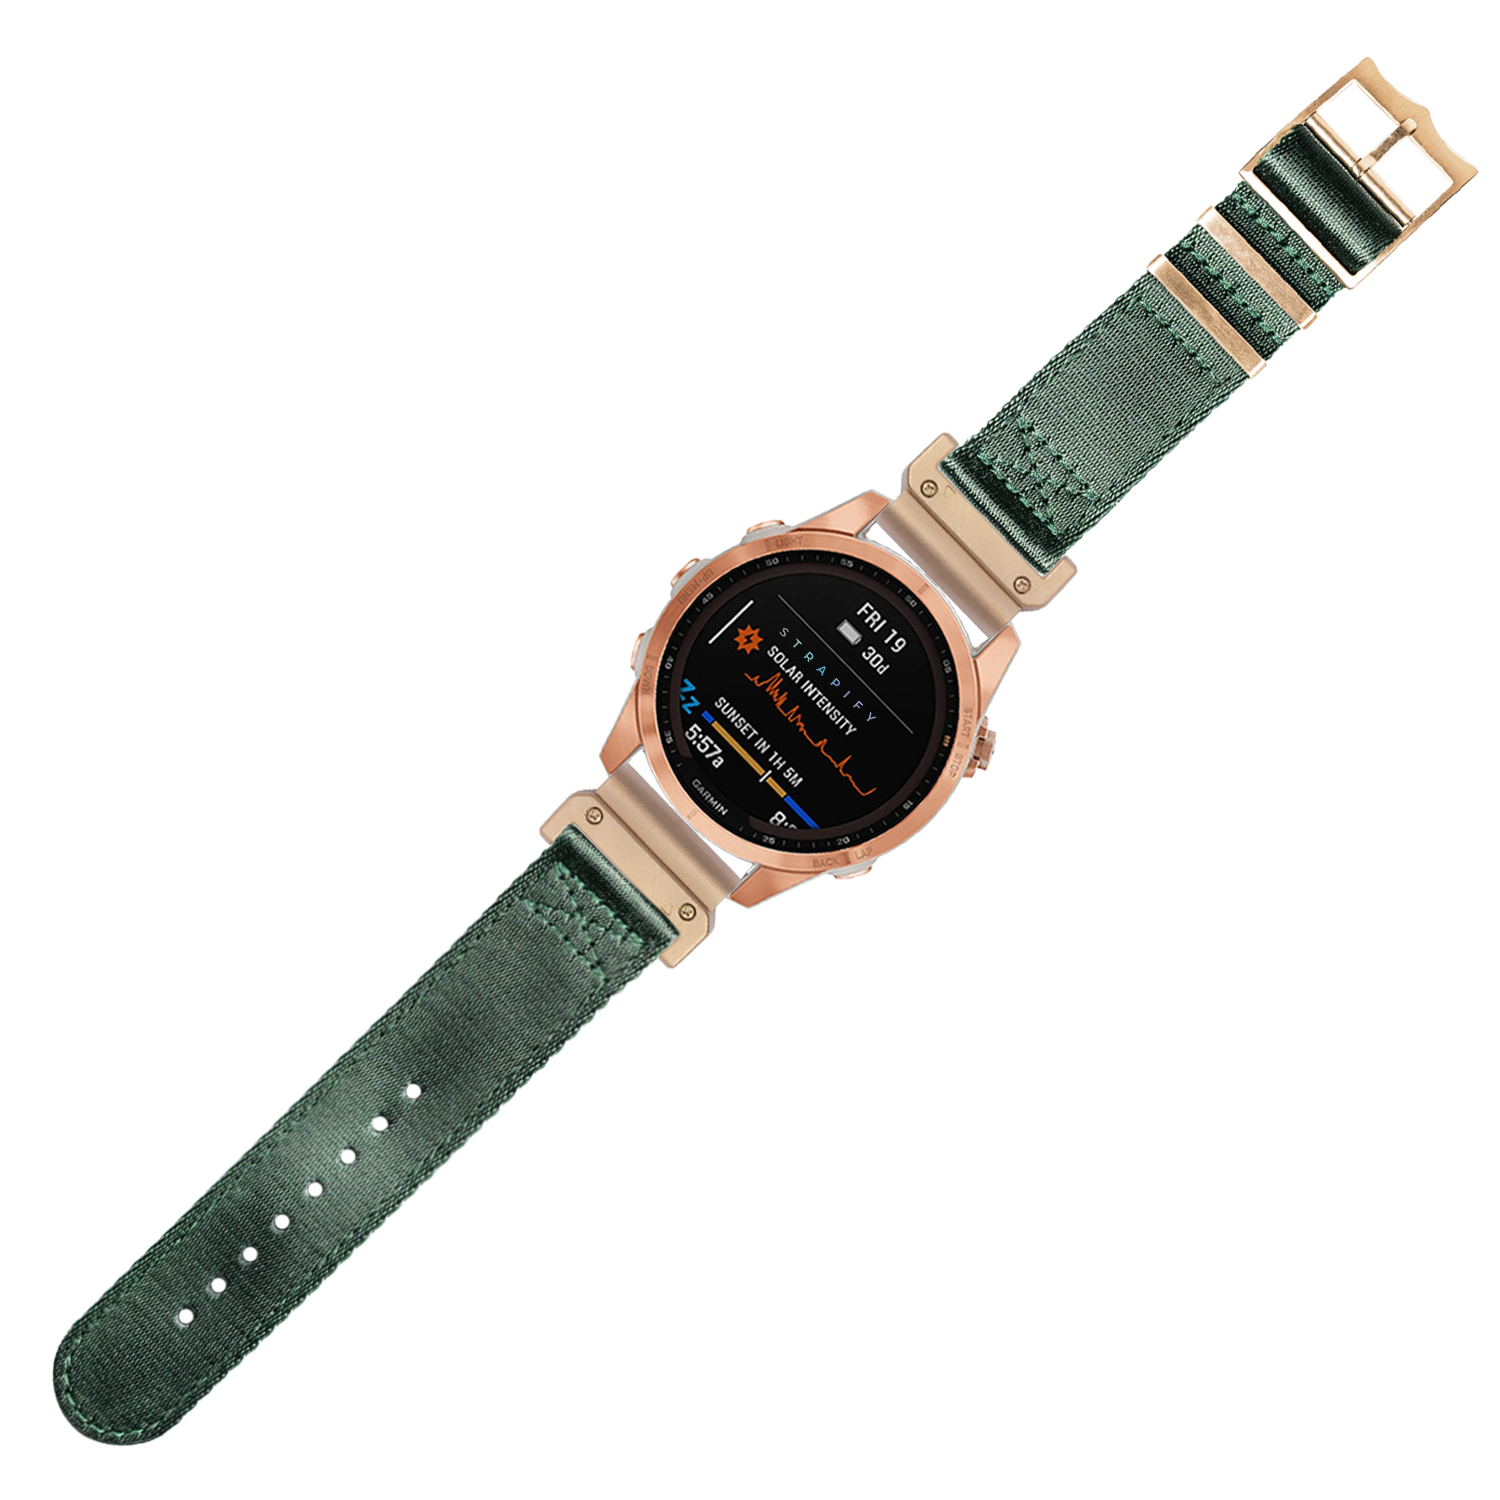 [QuickFit] Ultra Militex - Forest Green [Rose Gold Hardware] 22mm